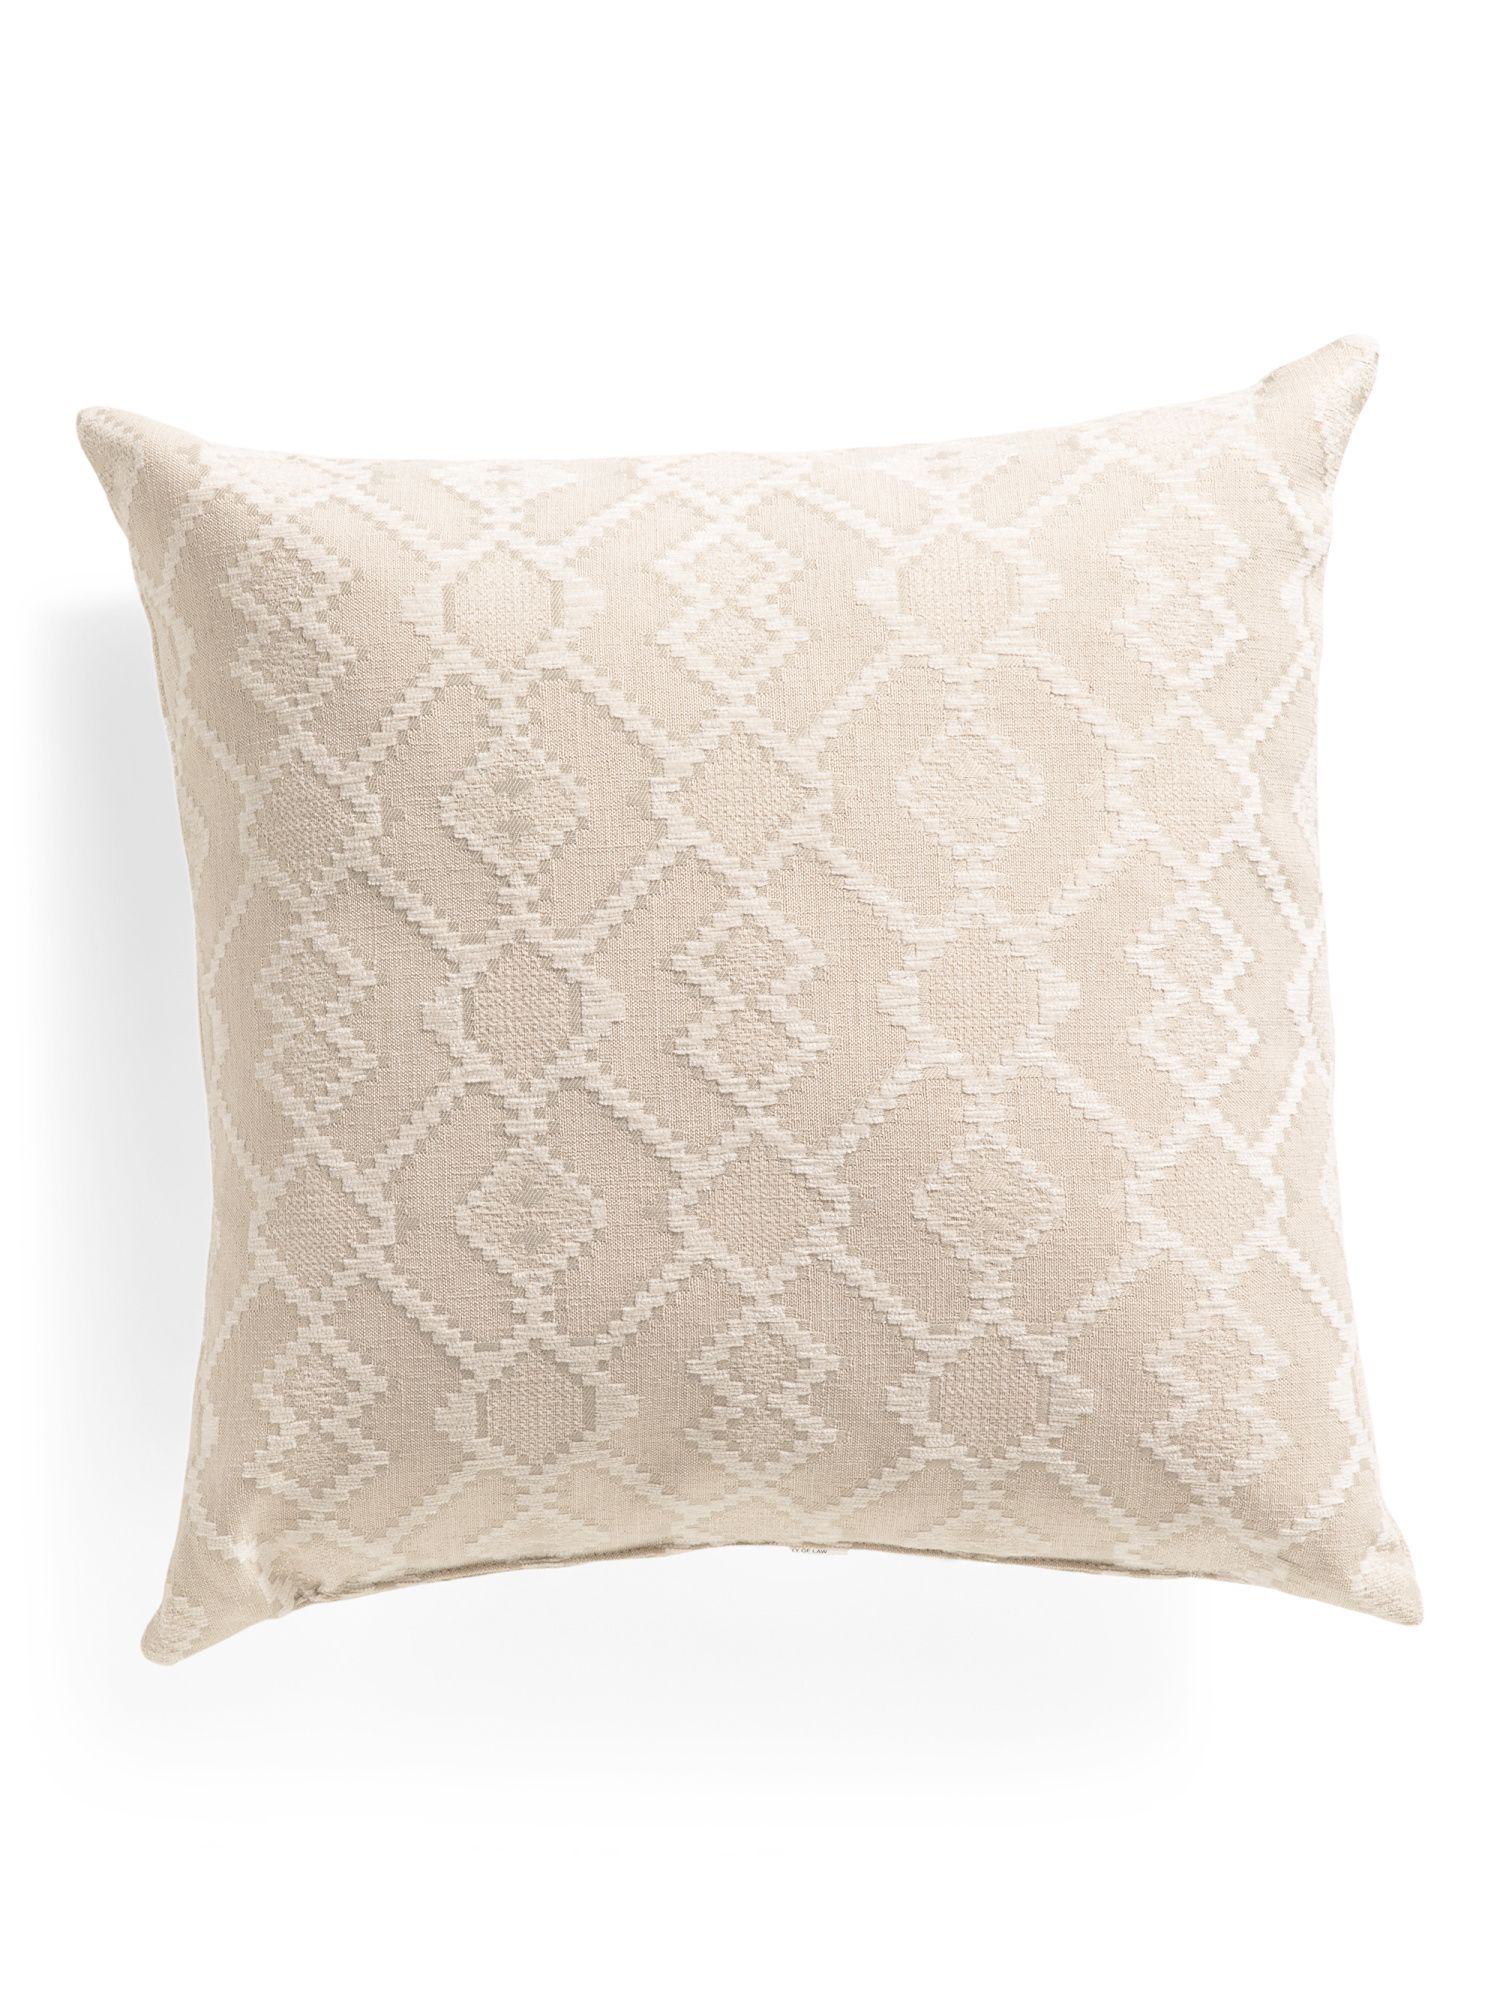 Made In Usa 22x22 Geo Pillow | Marshalls